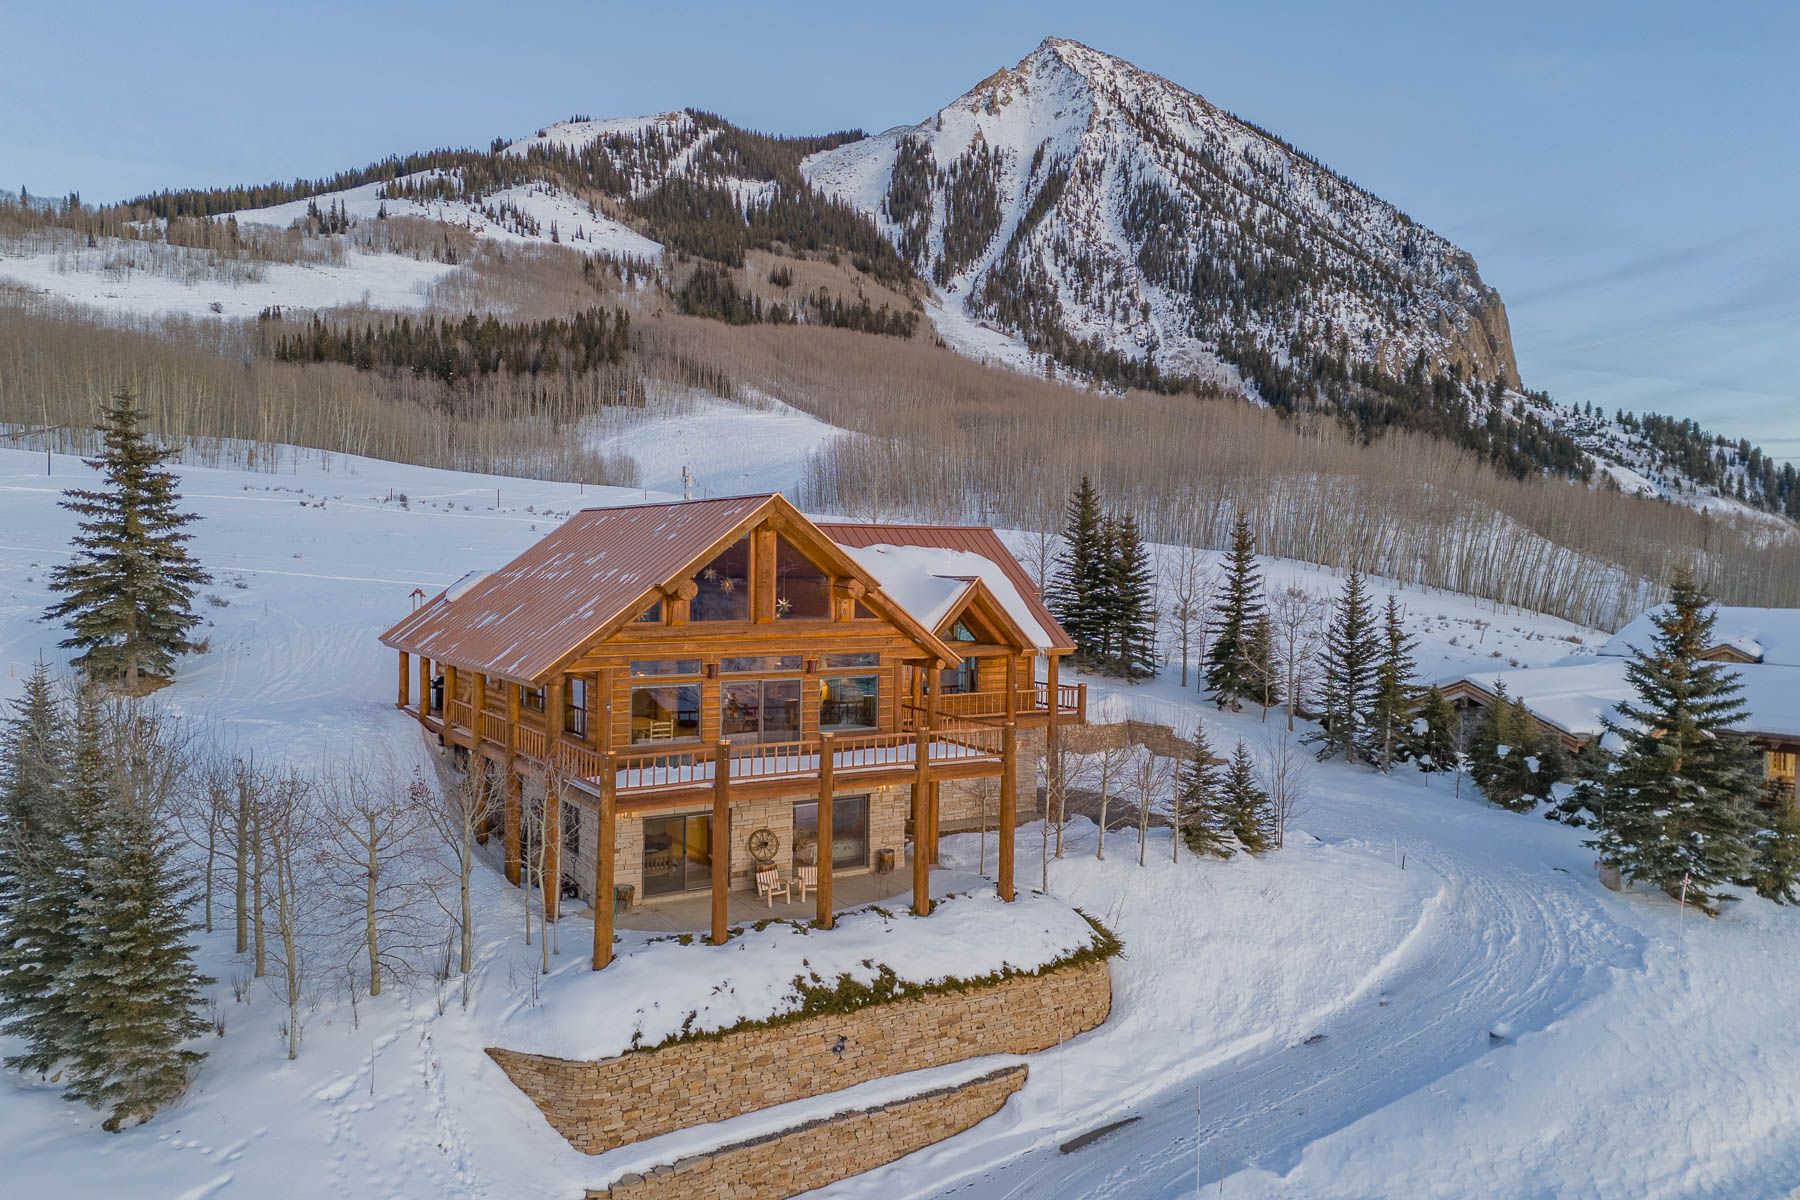 56 Summit Road, Mt. Crested Butte, CO